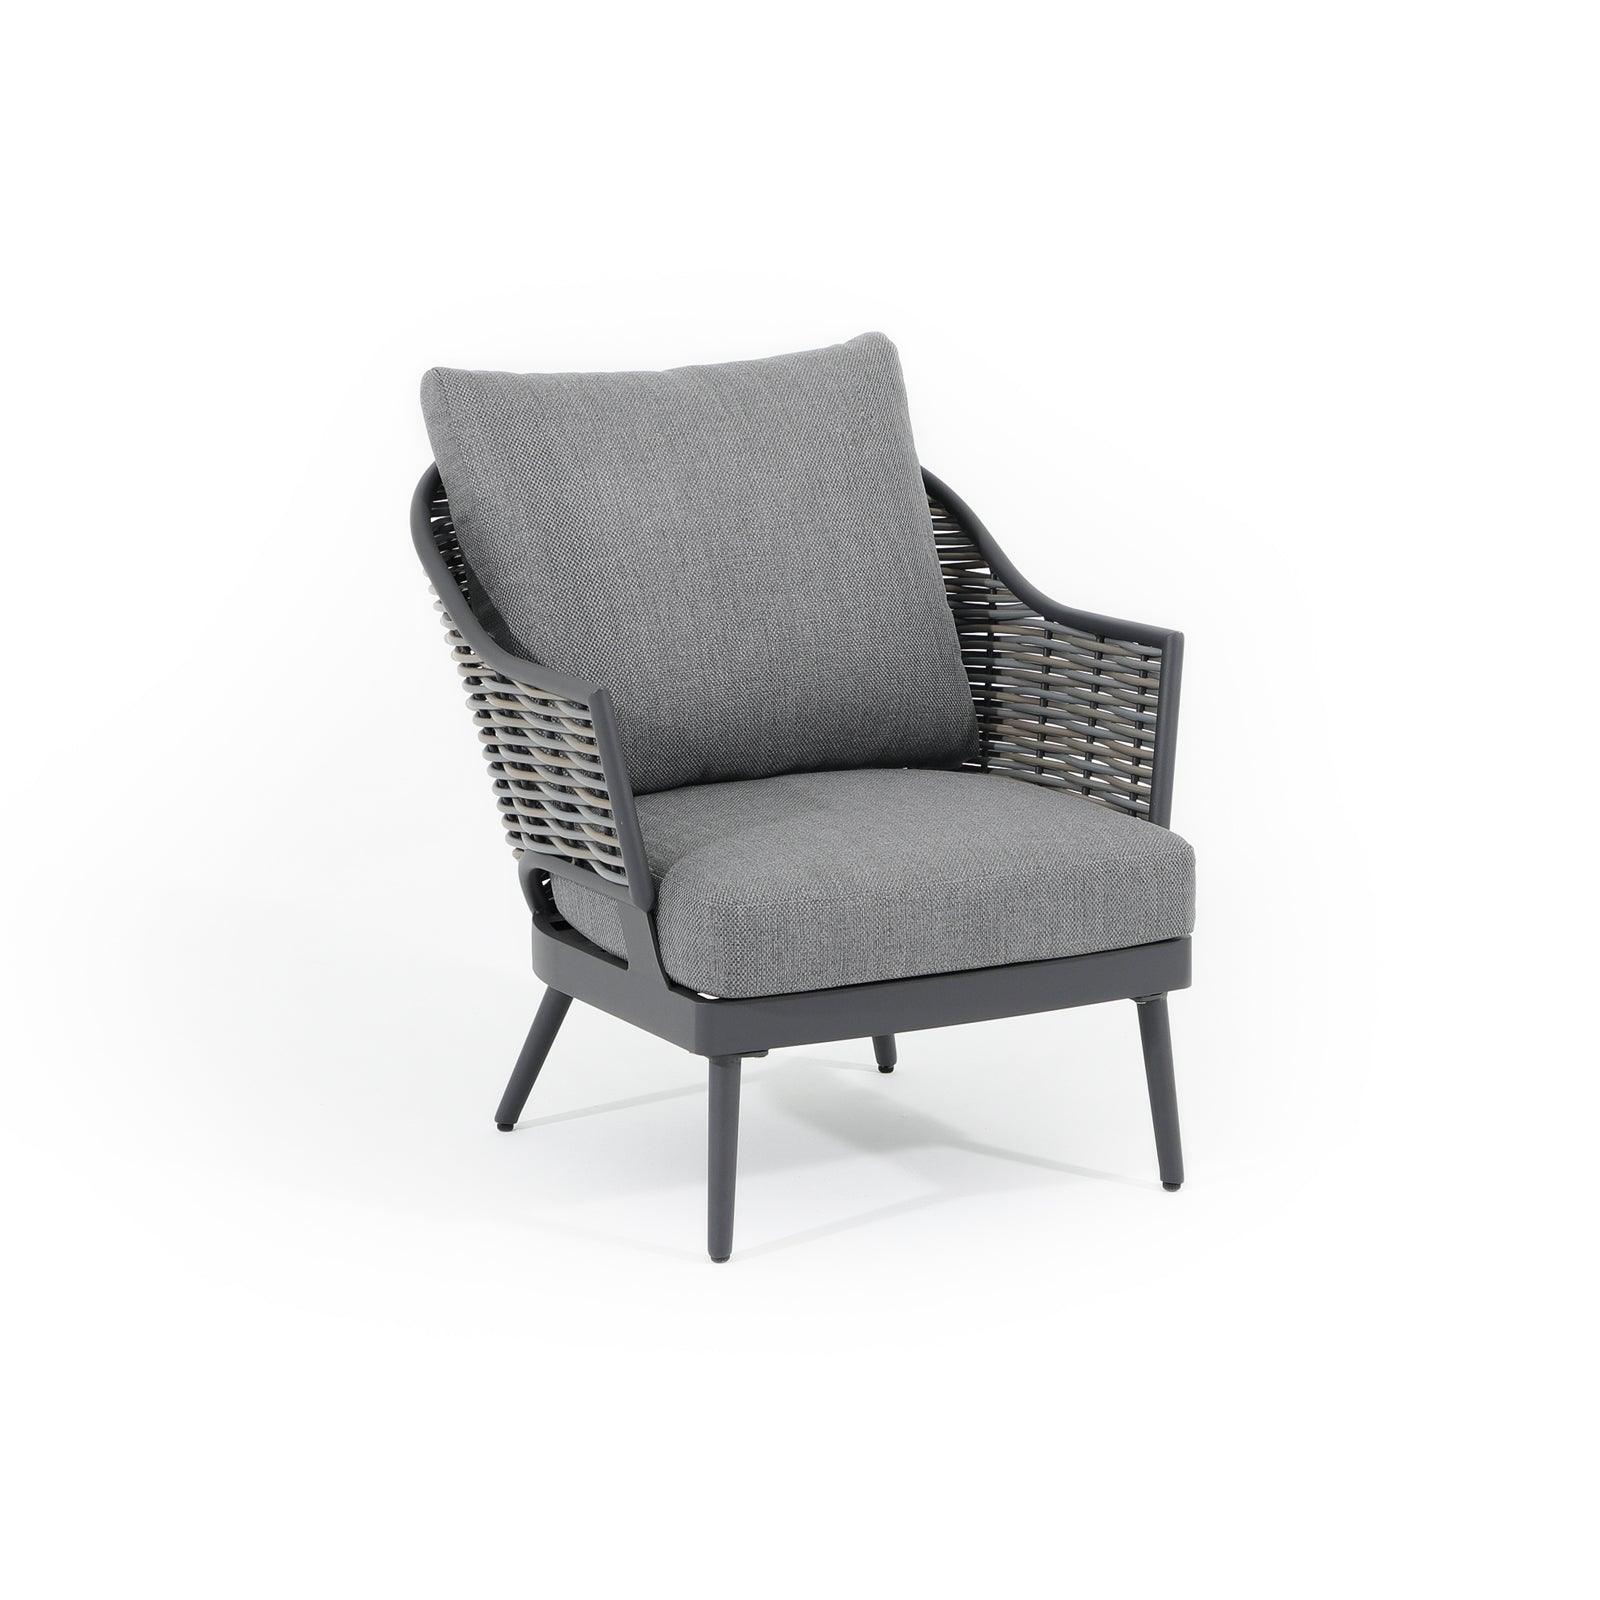 Burano Grey wicker outdoor arm chair with aluminum frame, grey cushions, 1 seat, right - Jardina Furniture